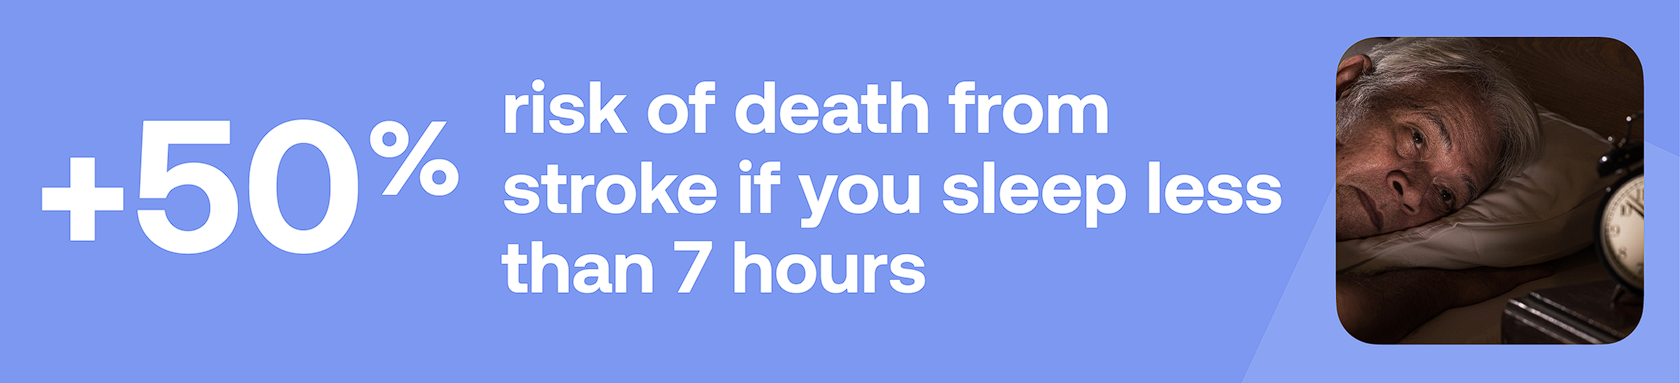 +50% risk of death from stroke if you sleep less than 7 hours